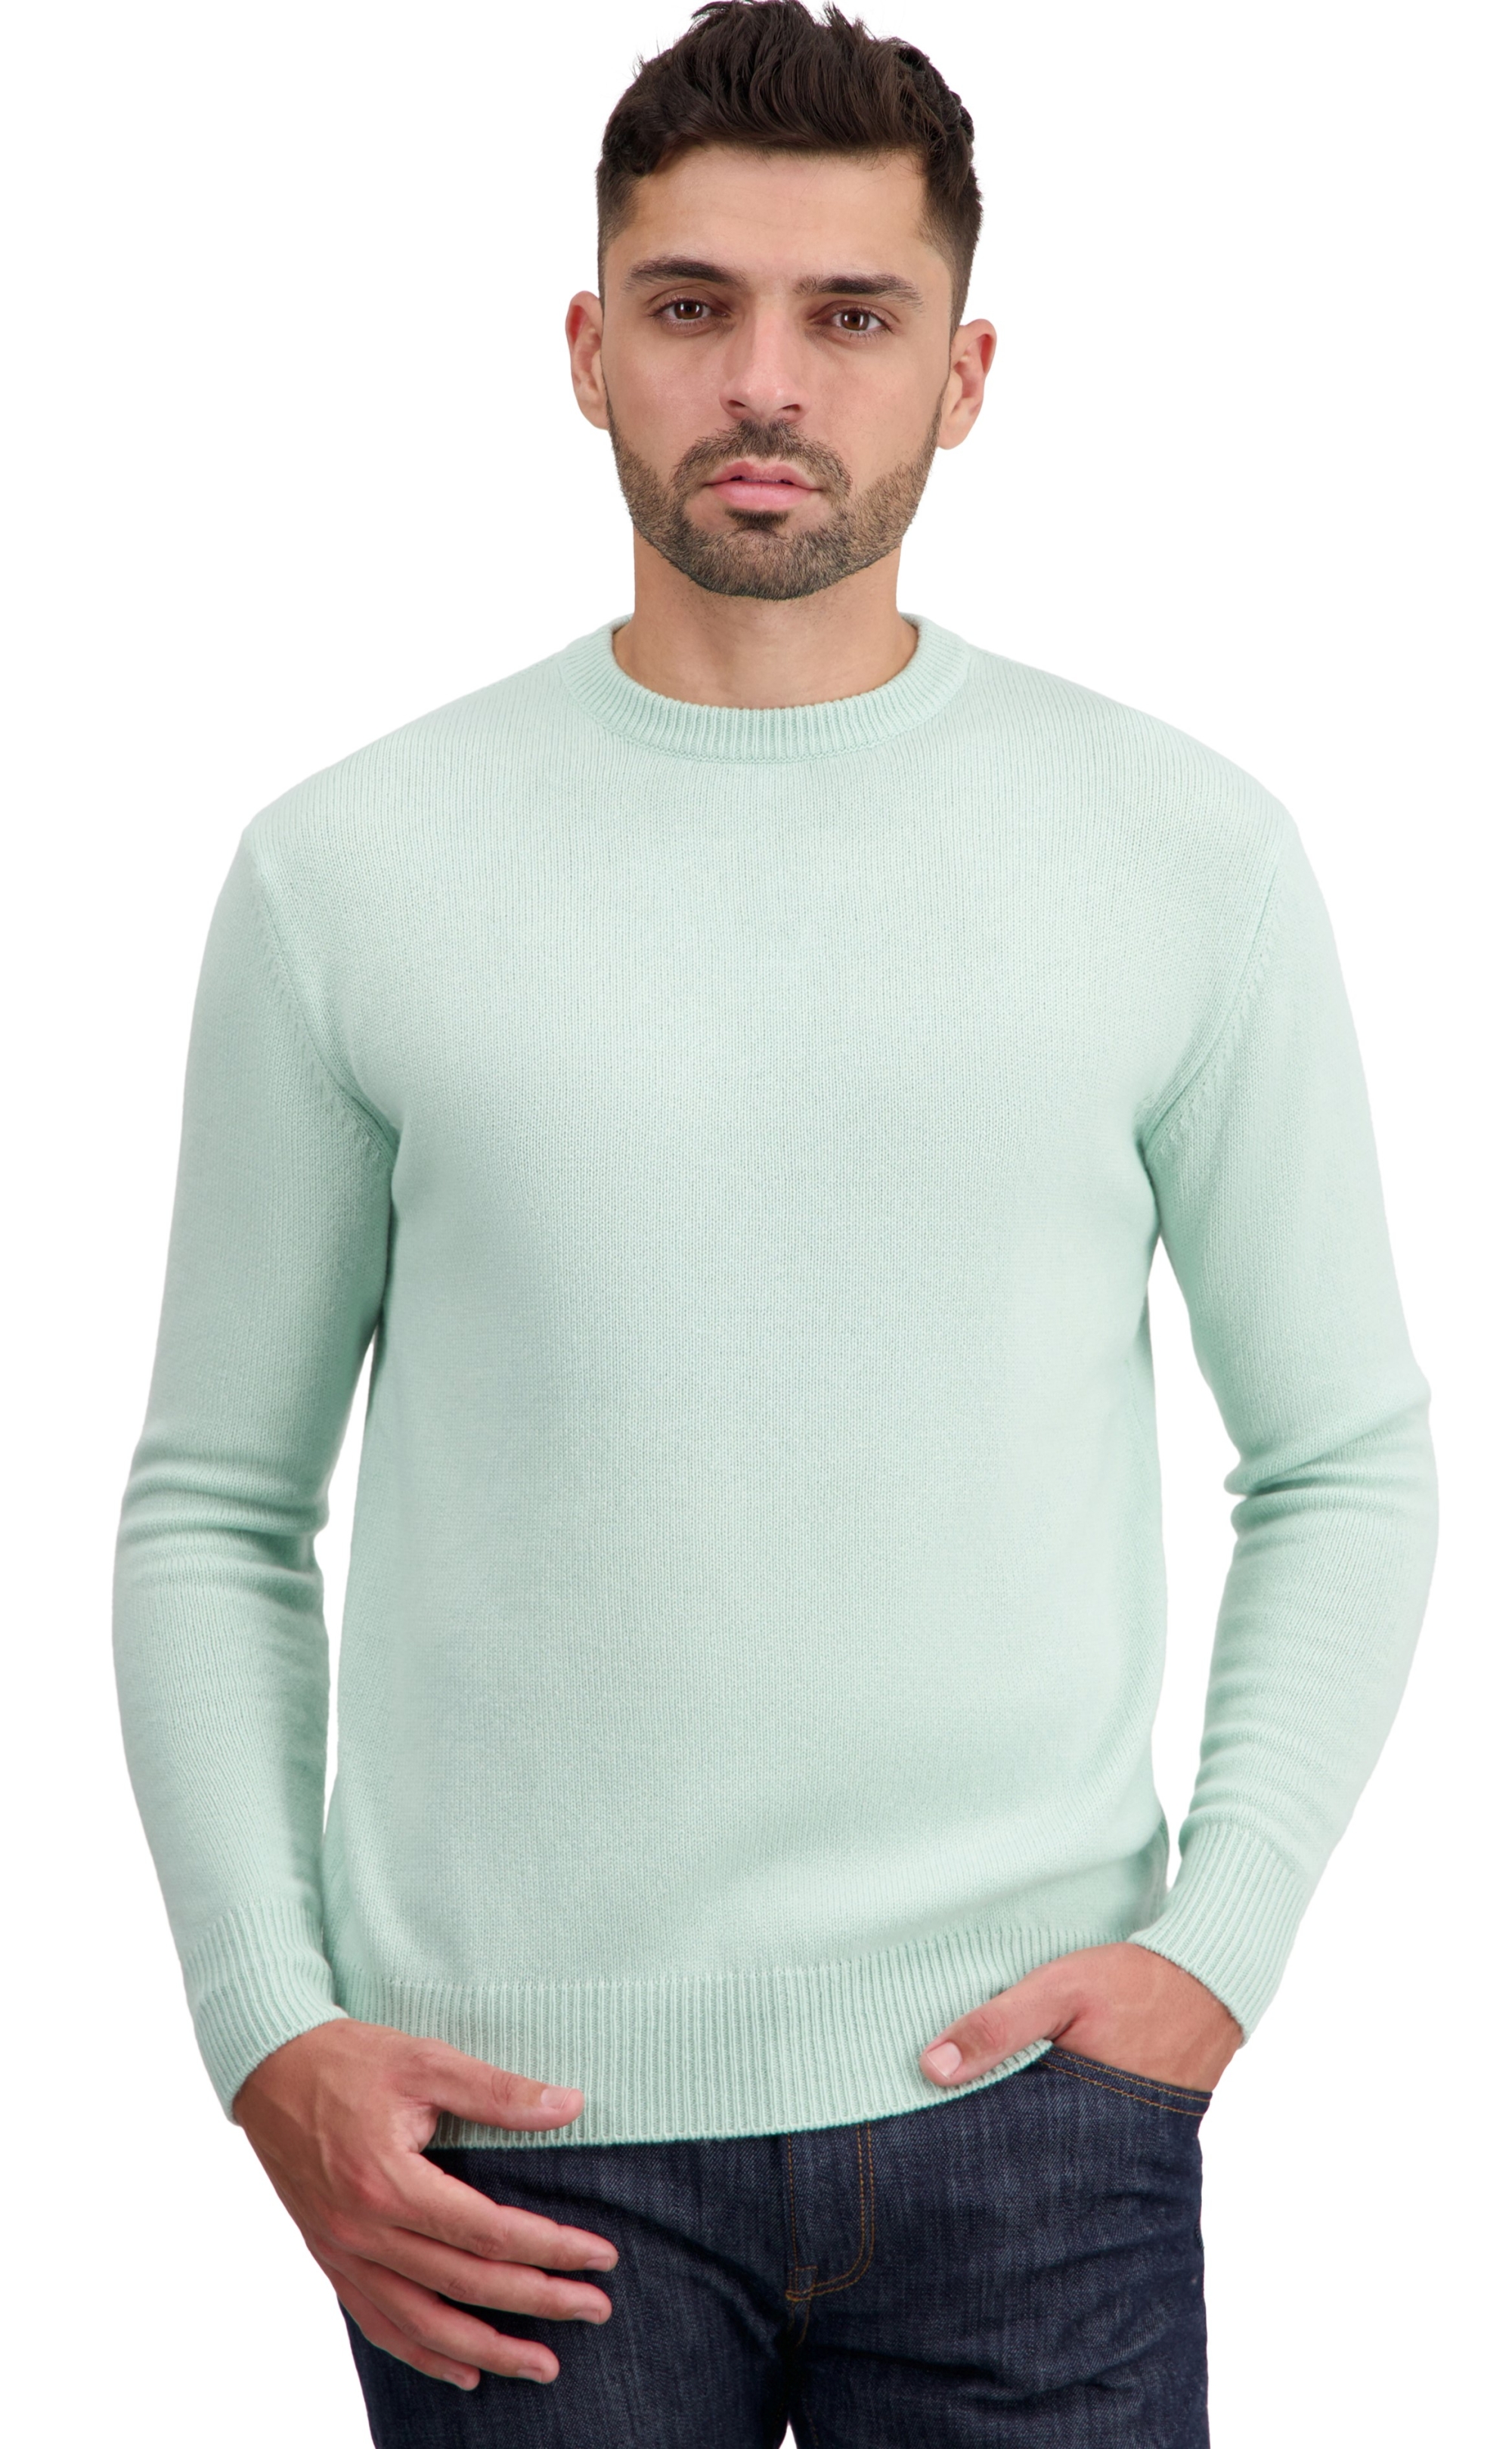 Cashmere men low prices touraine first embrace s